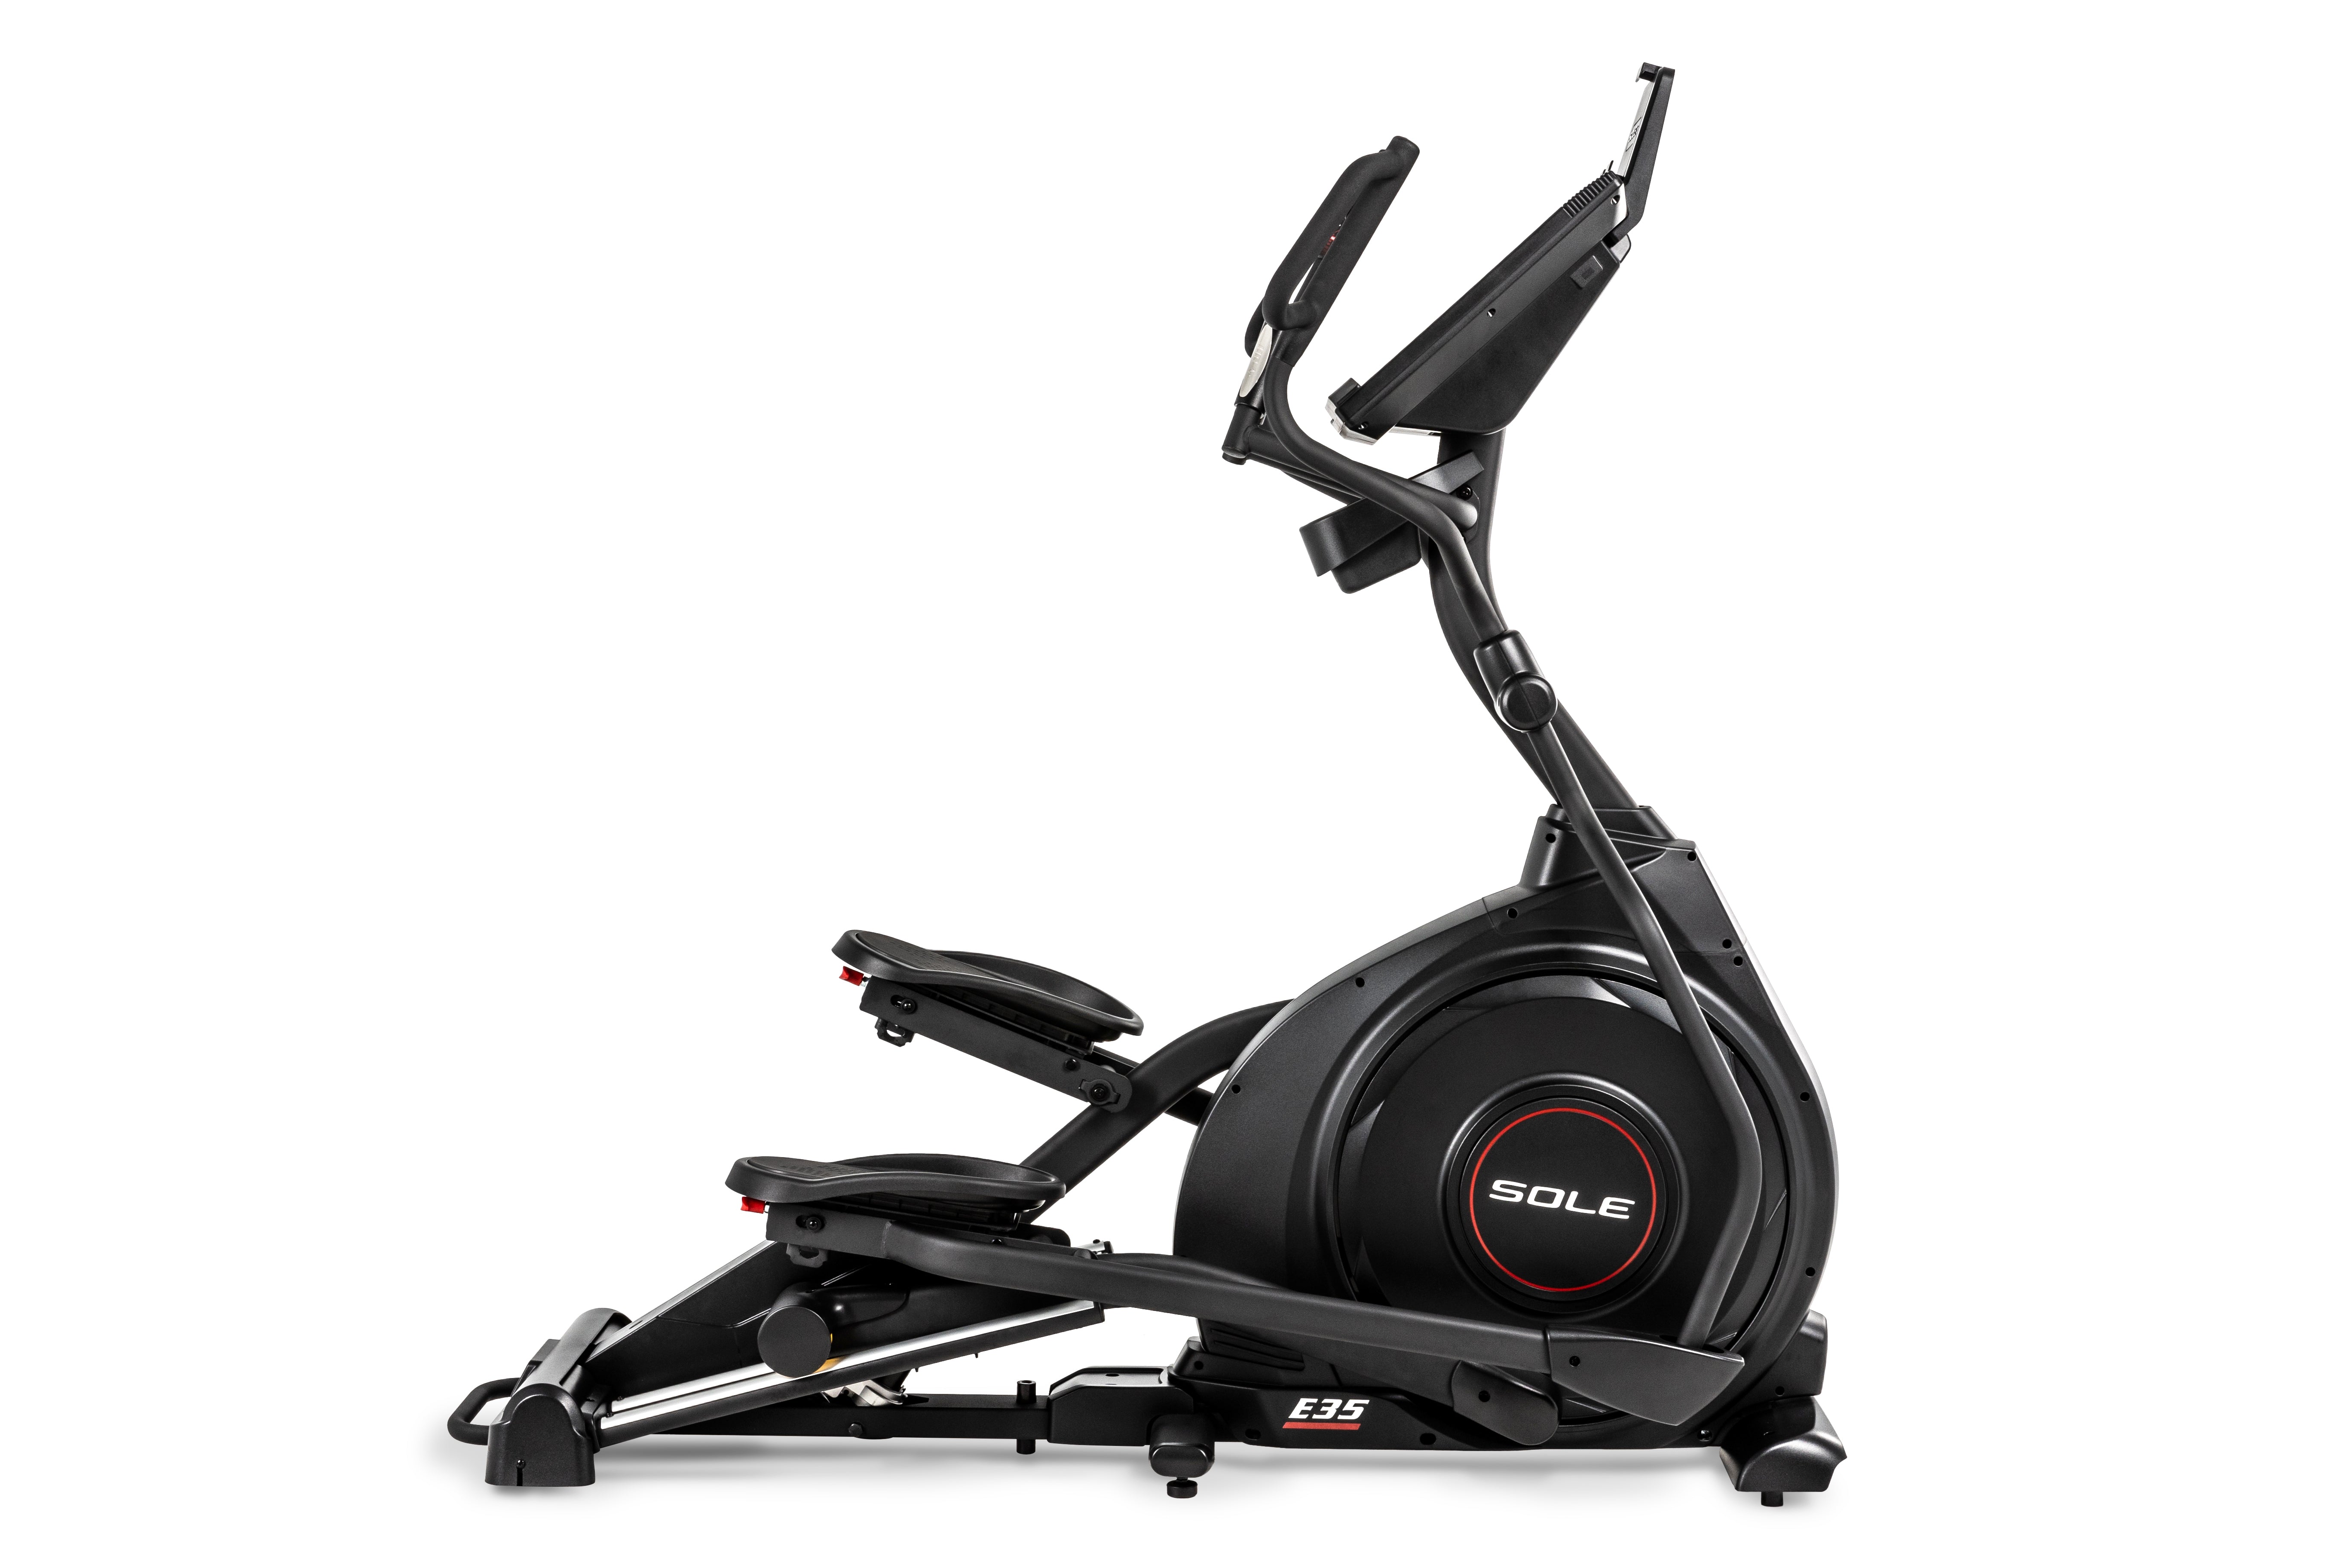 Sole E35 elliptical trainer viewed from a side angle, showcasing its sleek black design, adjustable foot pedals, 'SOLE' branding on the central flywheel, and 'E35' insignia on the lower frame.